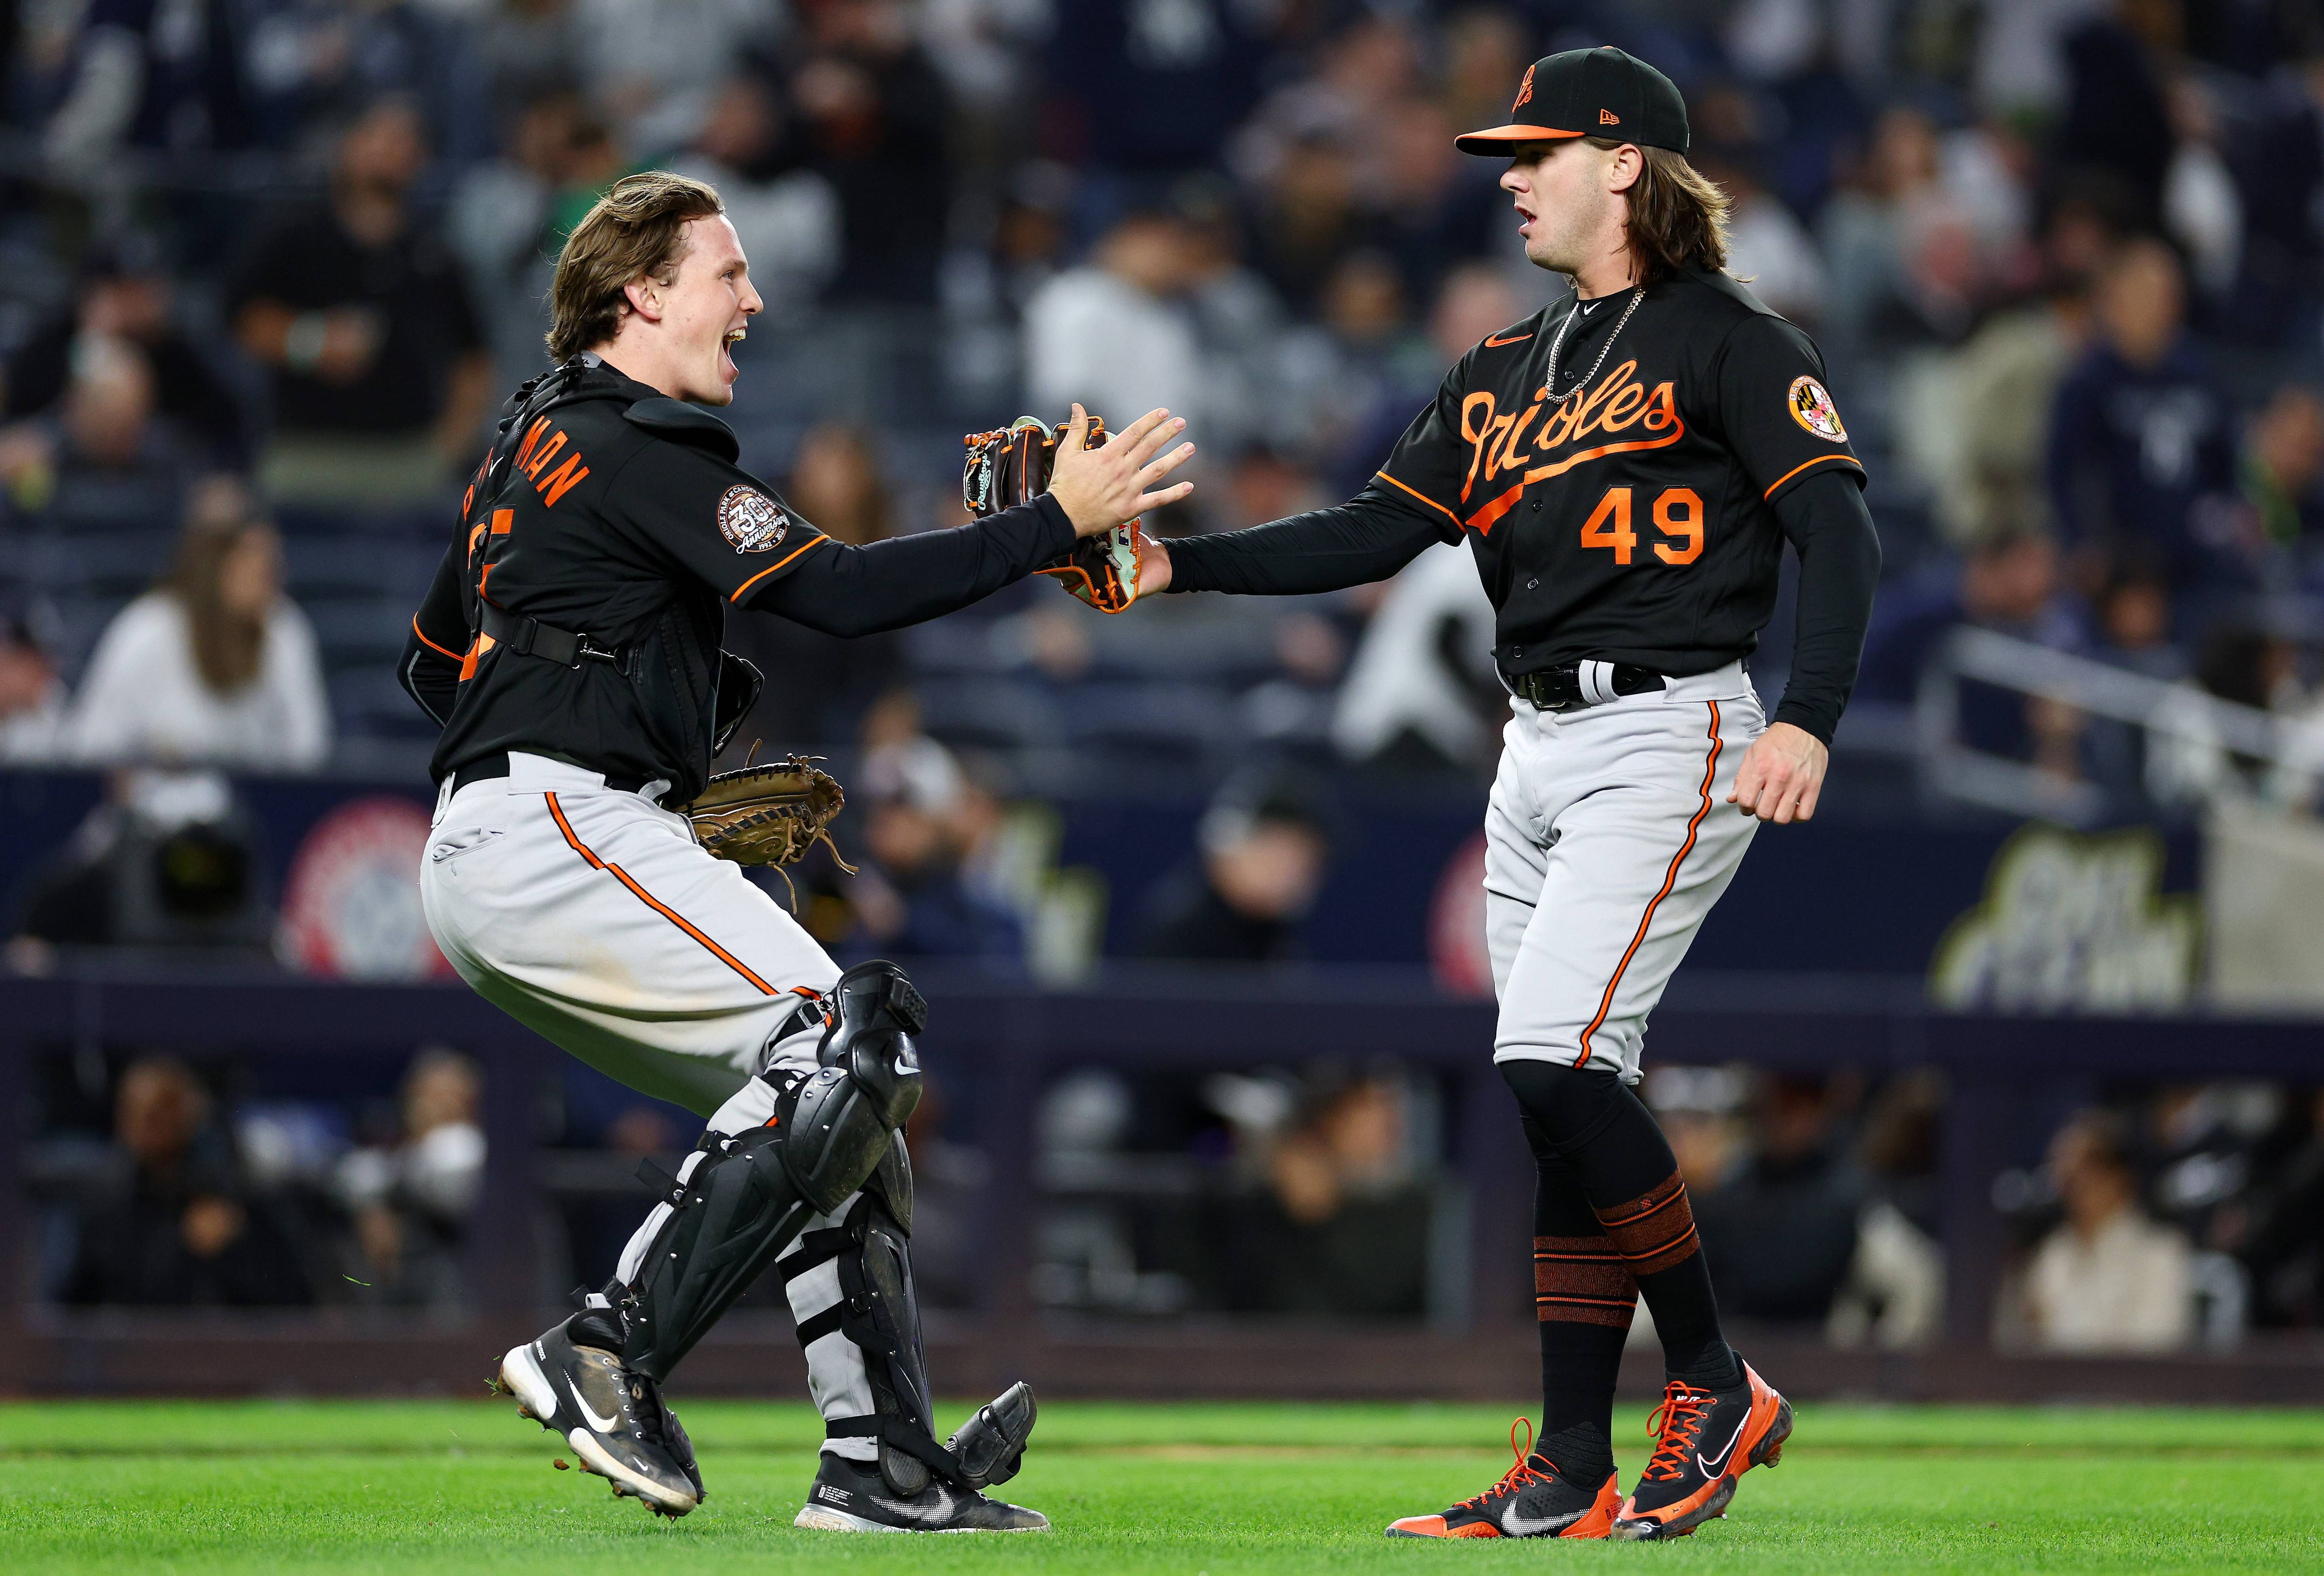 NEW YORK, NEW YORK - SEPTEMBER 30:  Adley Rutschman #35 and DL Hall #49 of the Baltimore Orioles celebrate the win over the New York Yankees at Yankee Stadium on September 30, 2022 in the Bronx borough of New York City. The Baltimore Orioles defeated the New York Yankees 2-1.